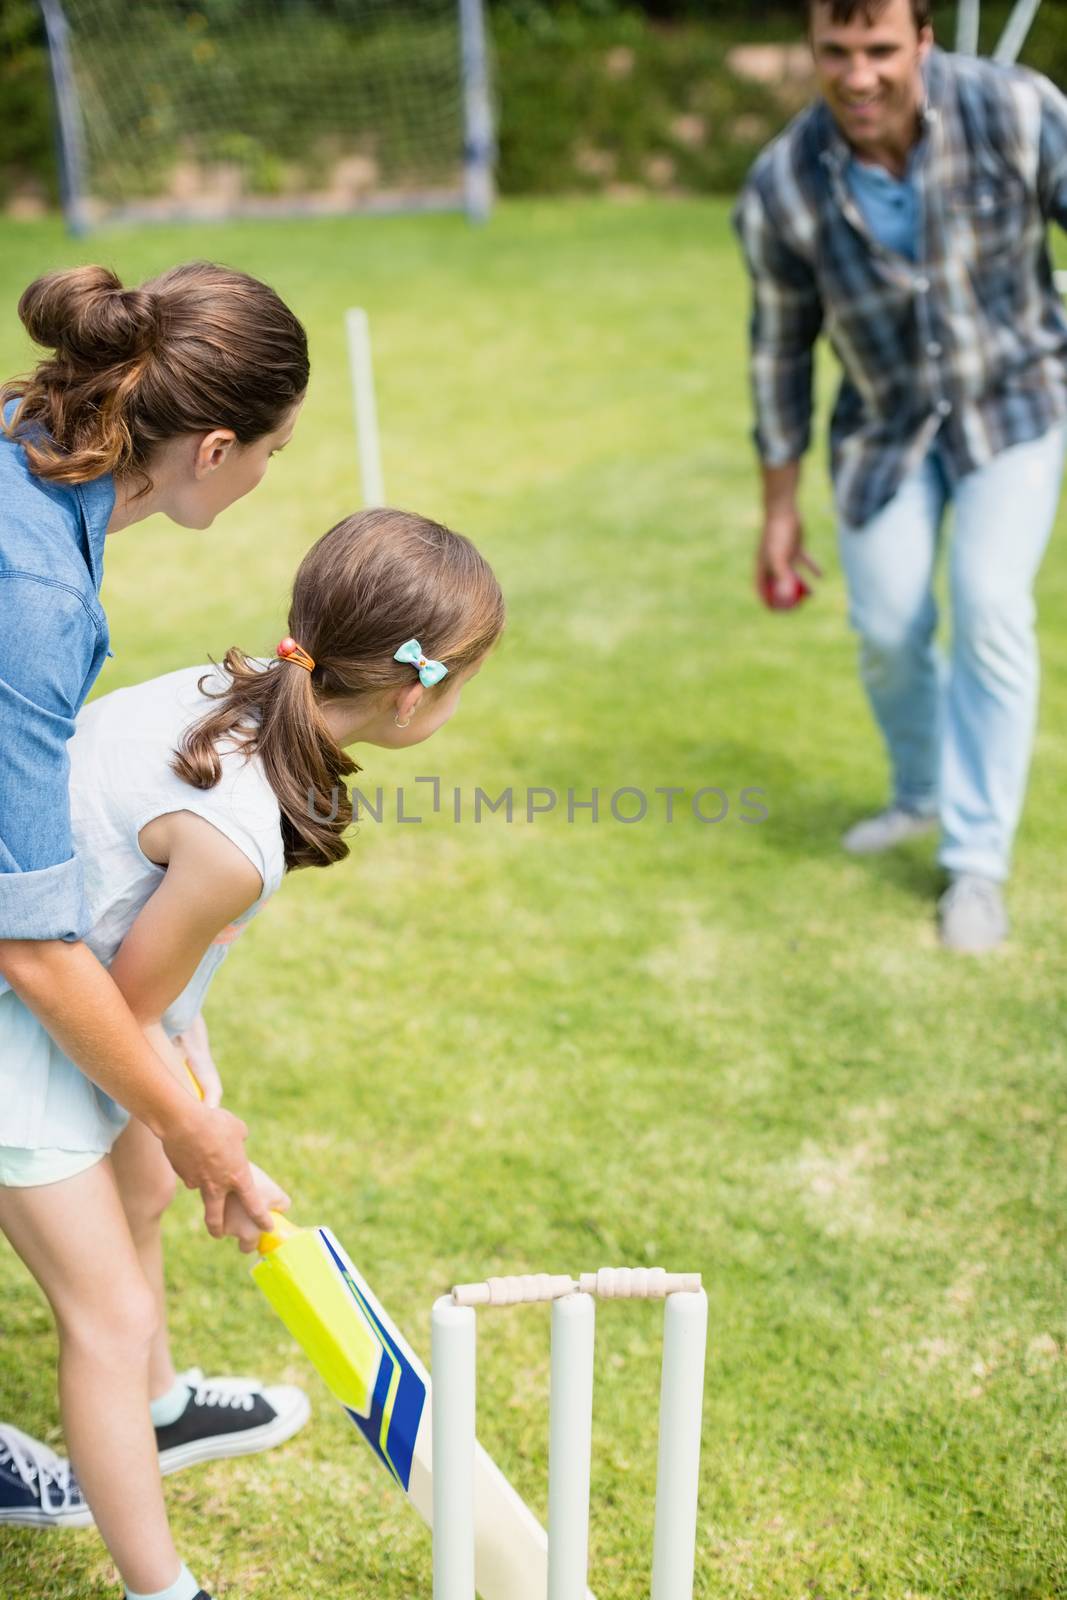 Family playing cricket in park on a sunny day